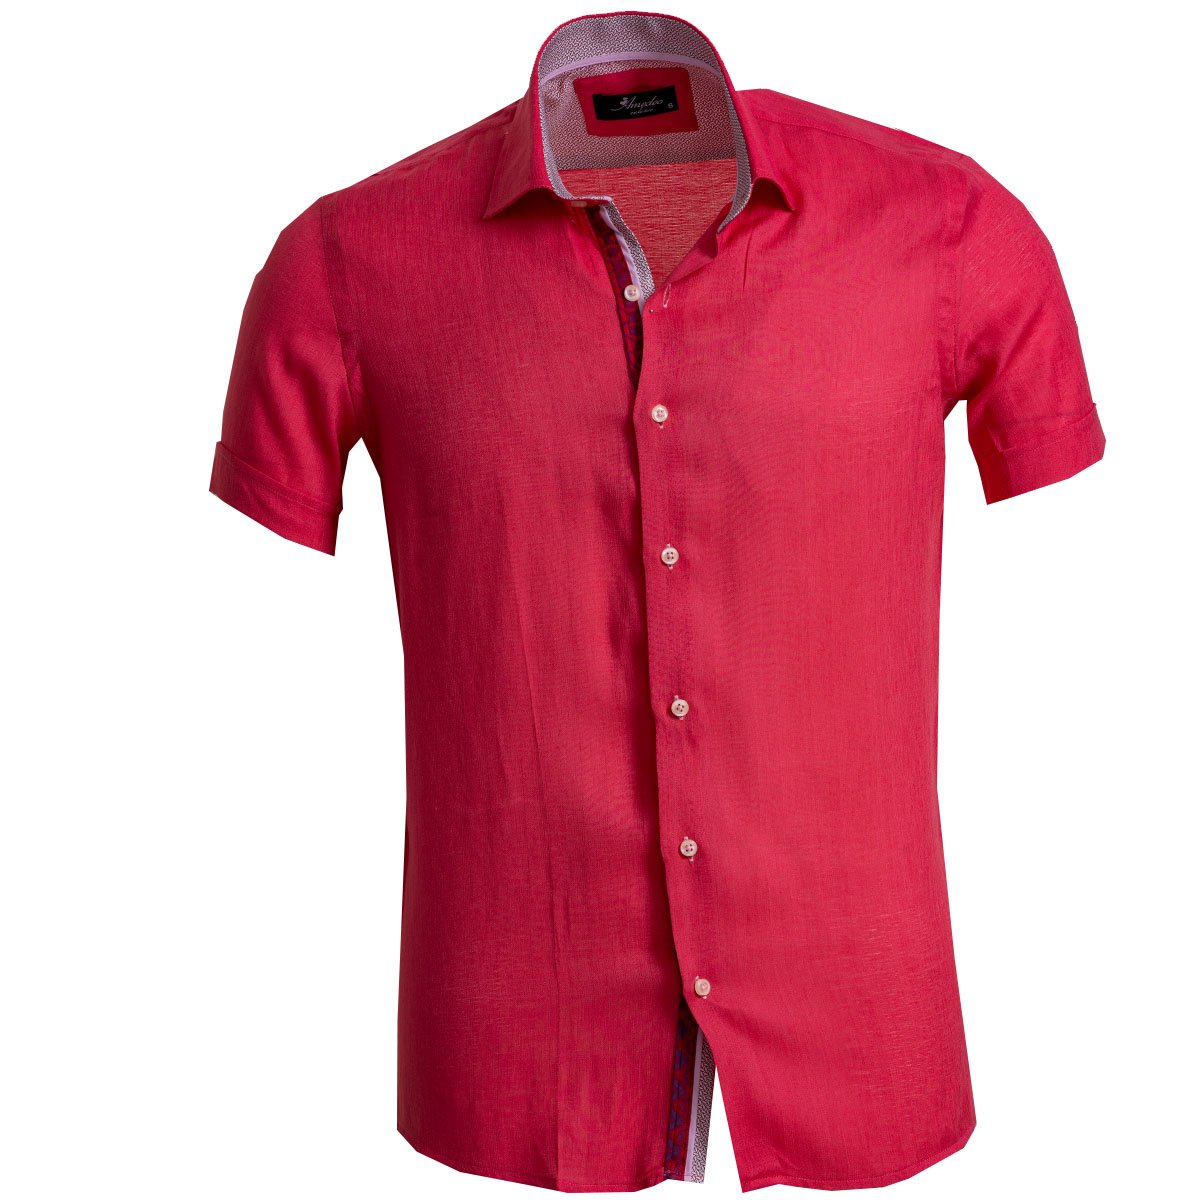 Solid Bright Red Men's Short Sleeve Button up Shirts - Tailored Slim –  Amedeo Exclusive